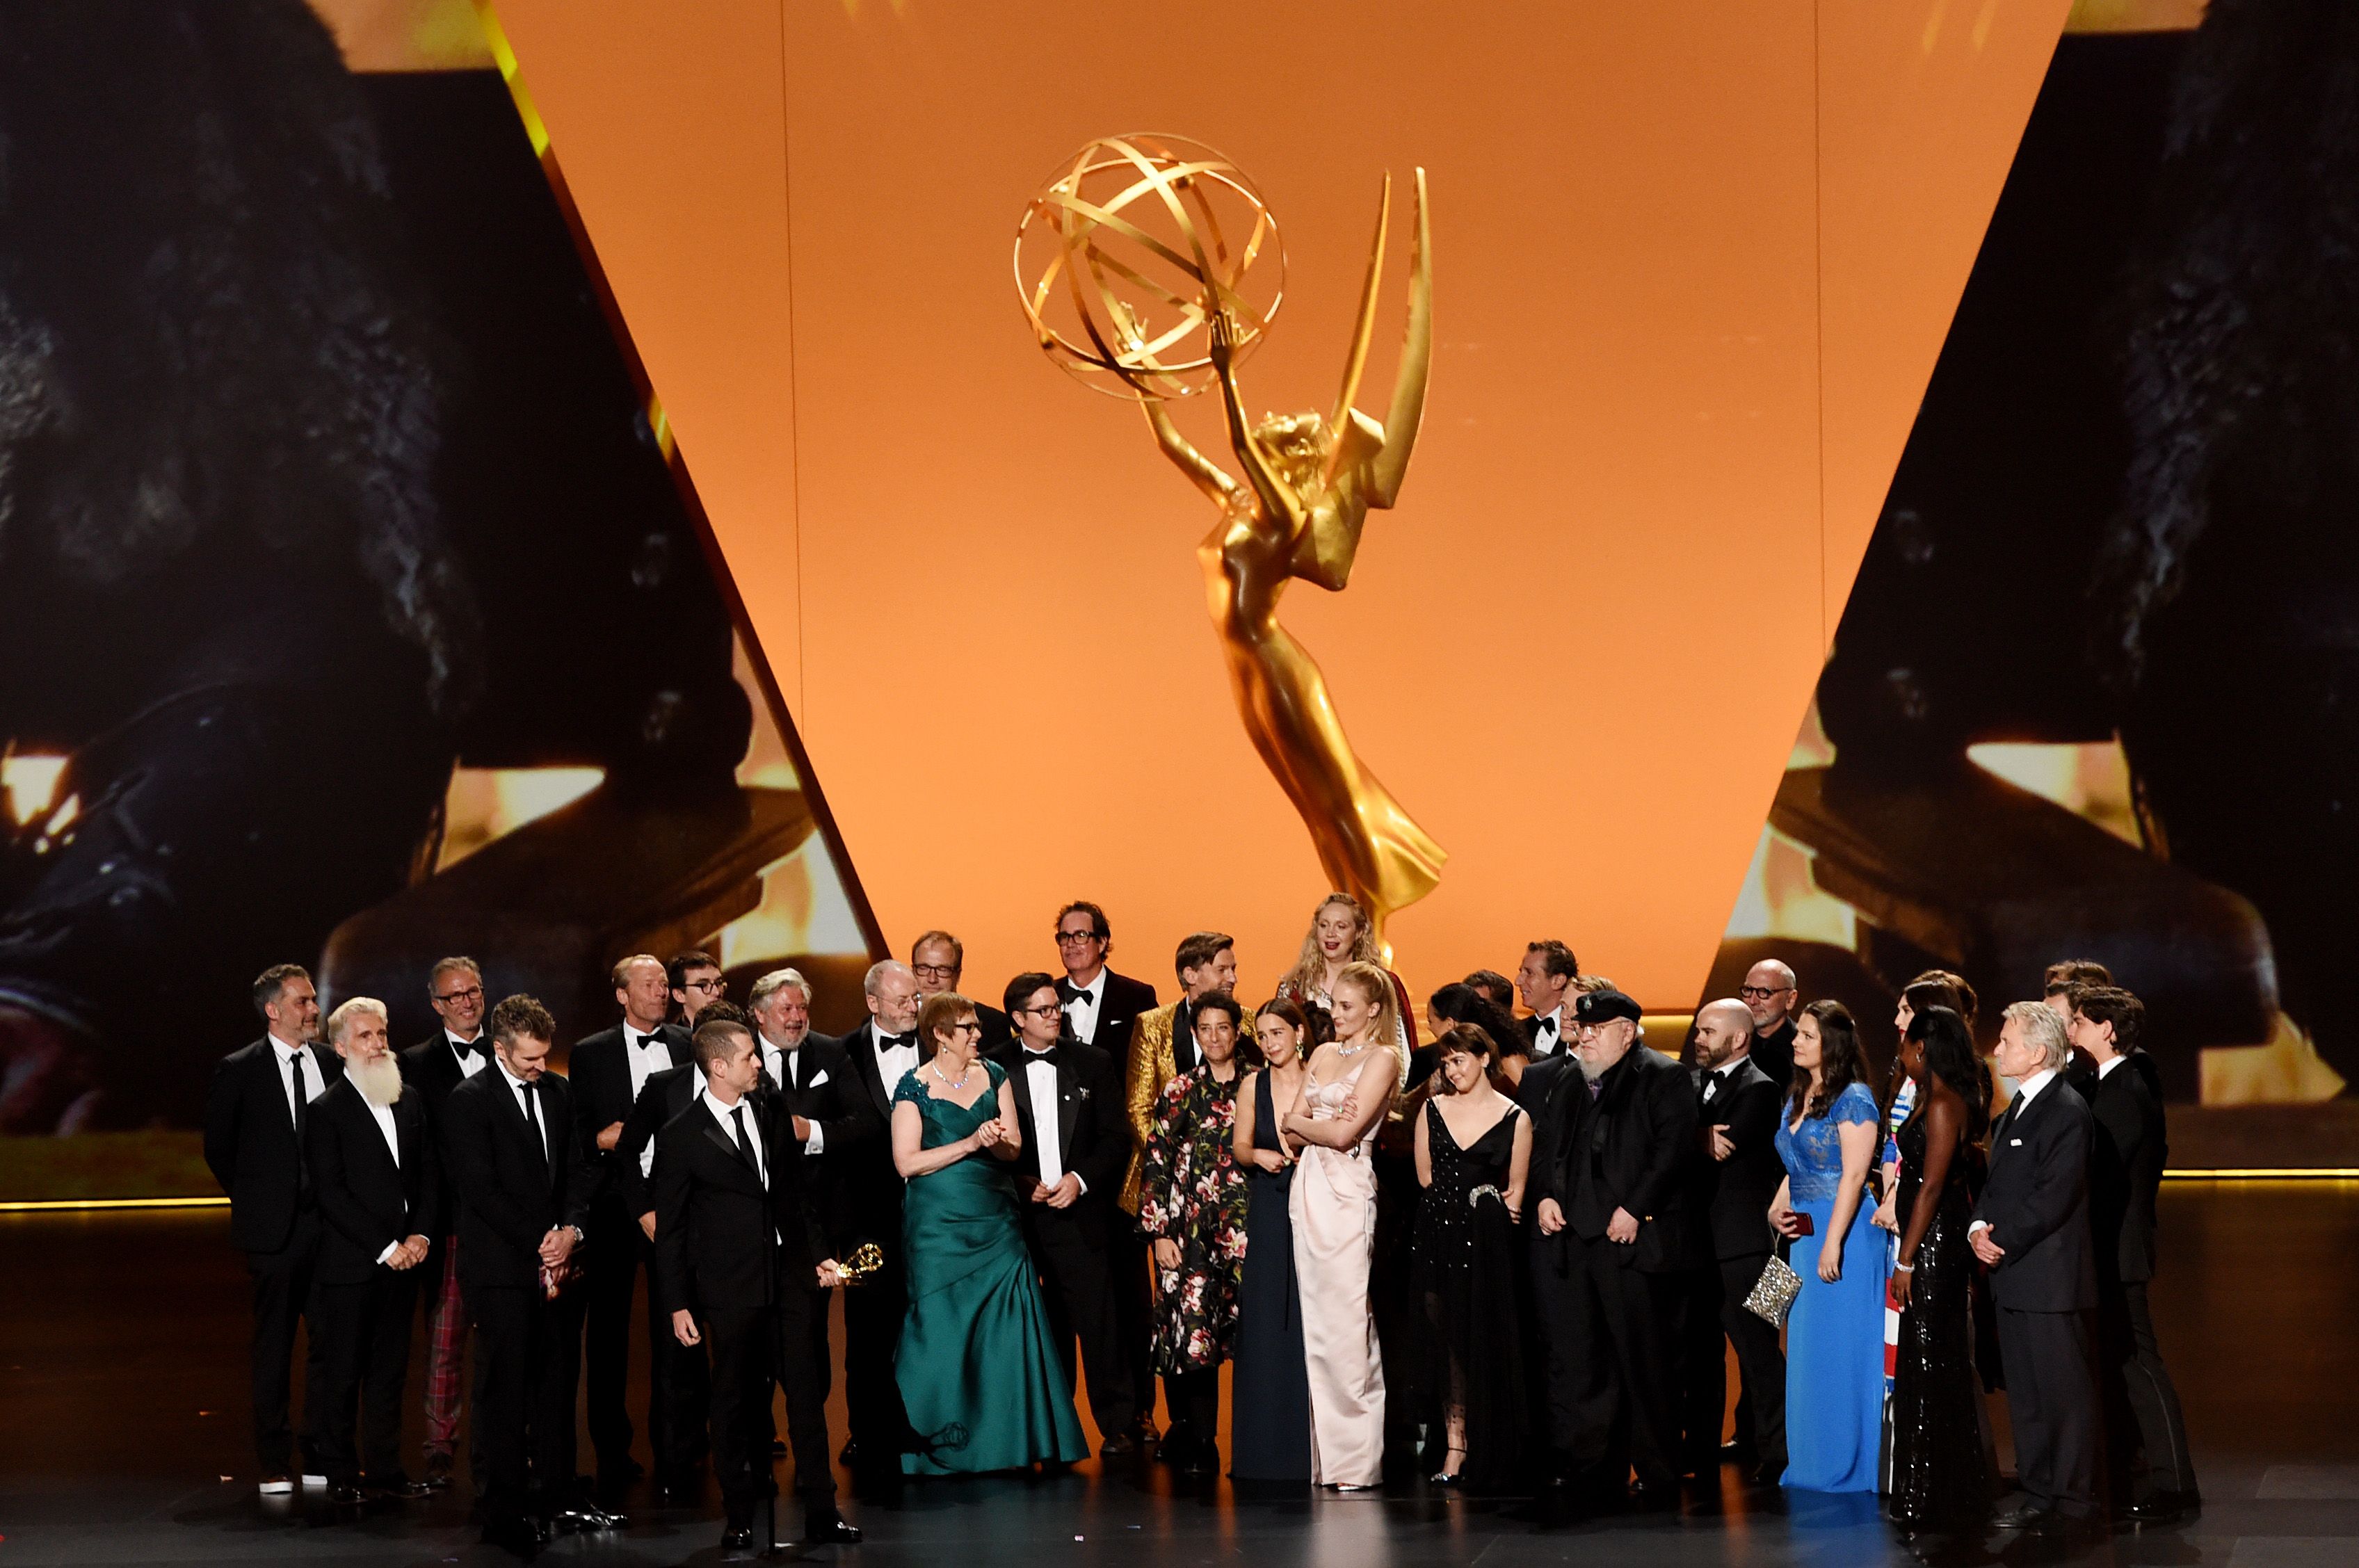 Game of Thrones' ends run with best drama award, 59 total Emmy Awards